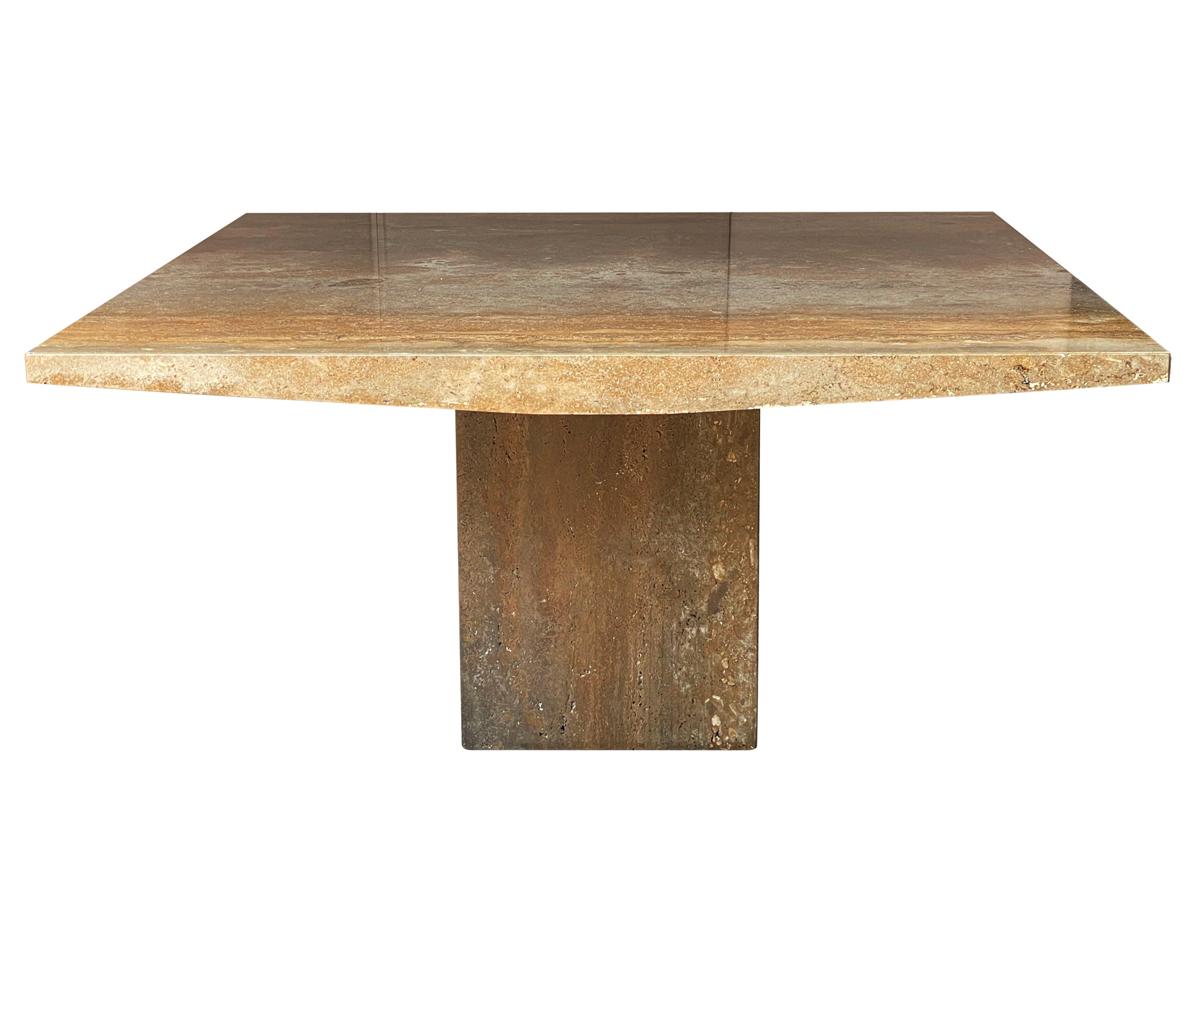 Late 20th Century Mid Century Italian Post Modern Large Square Organic Marble Dining Table